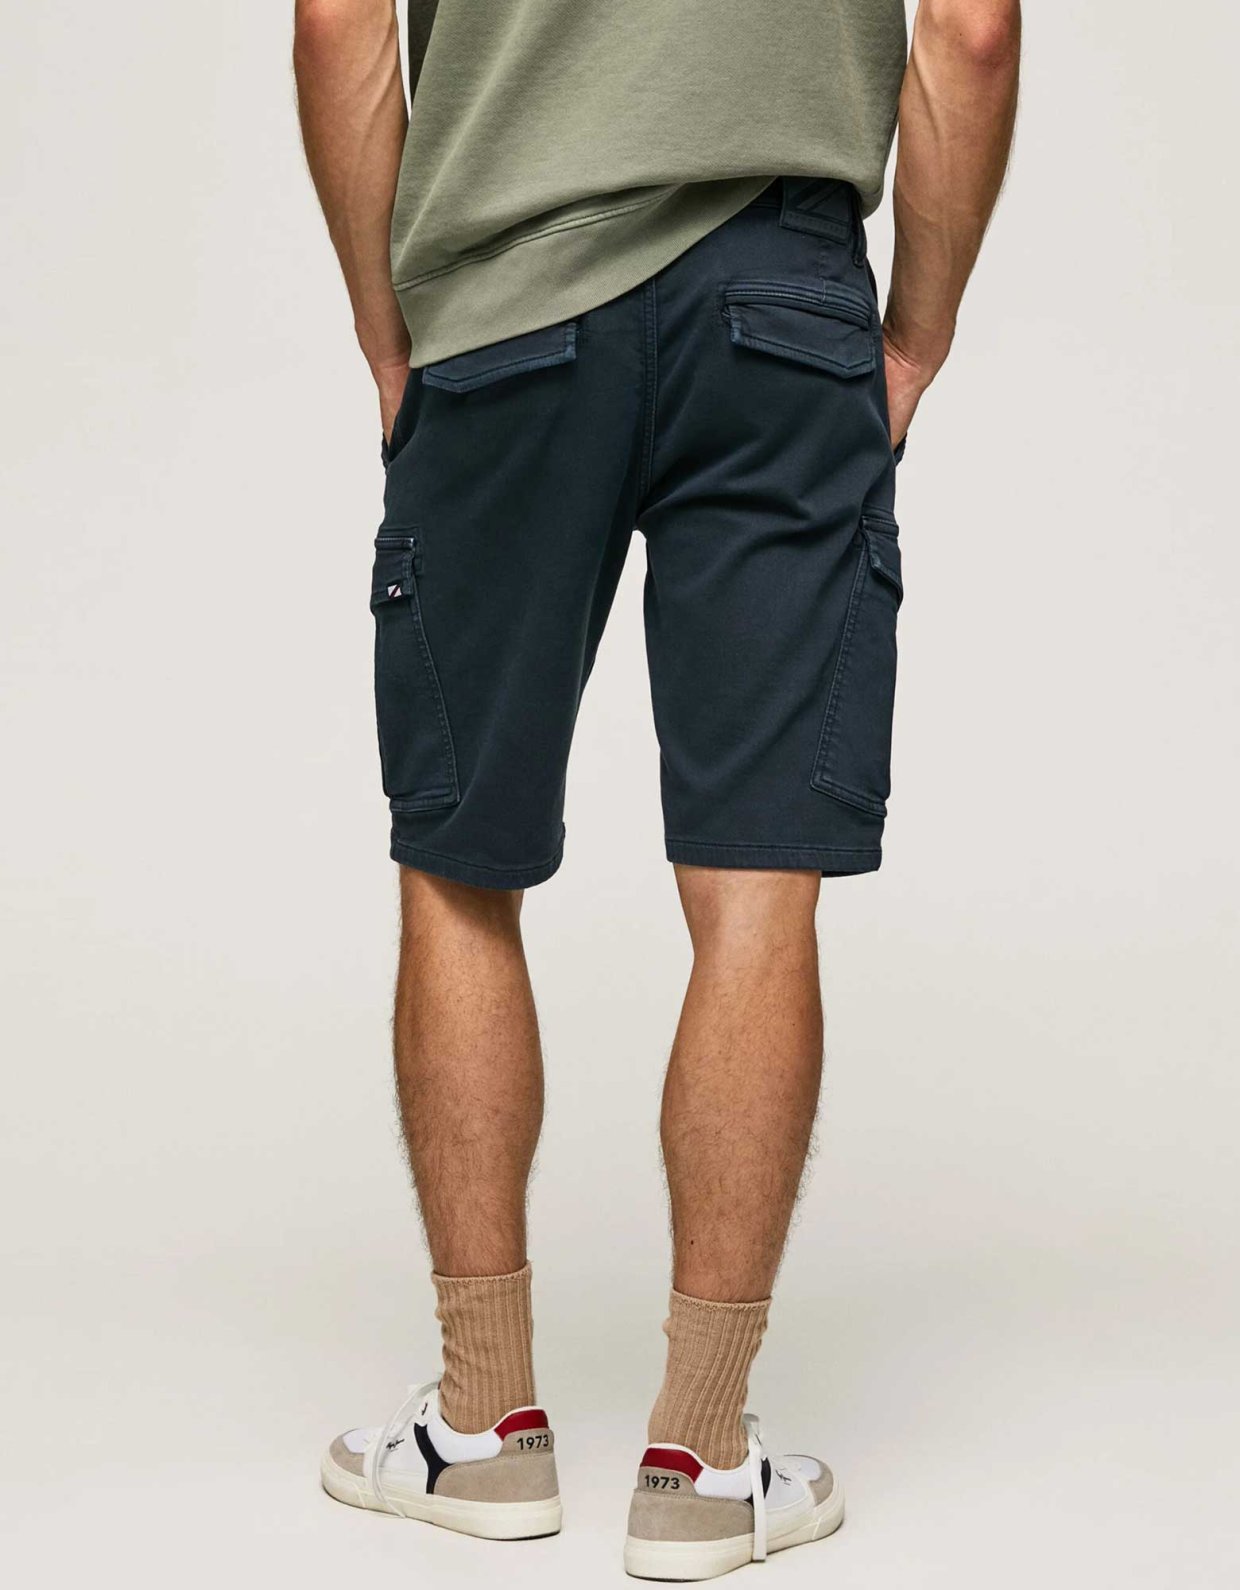 Pepe Jeans Jared shorts dulwich